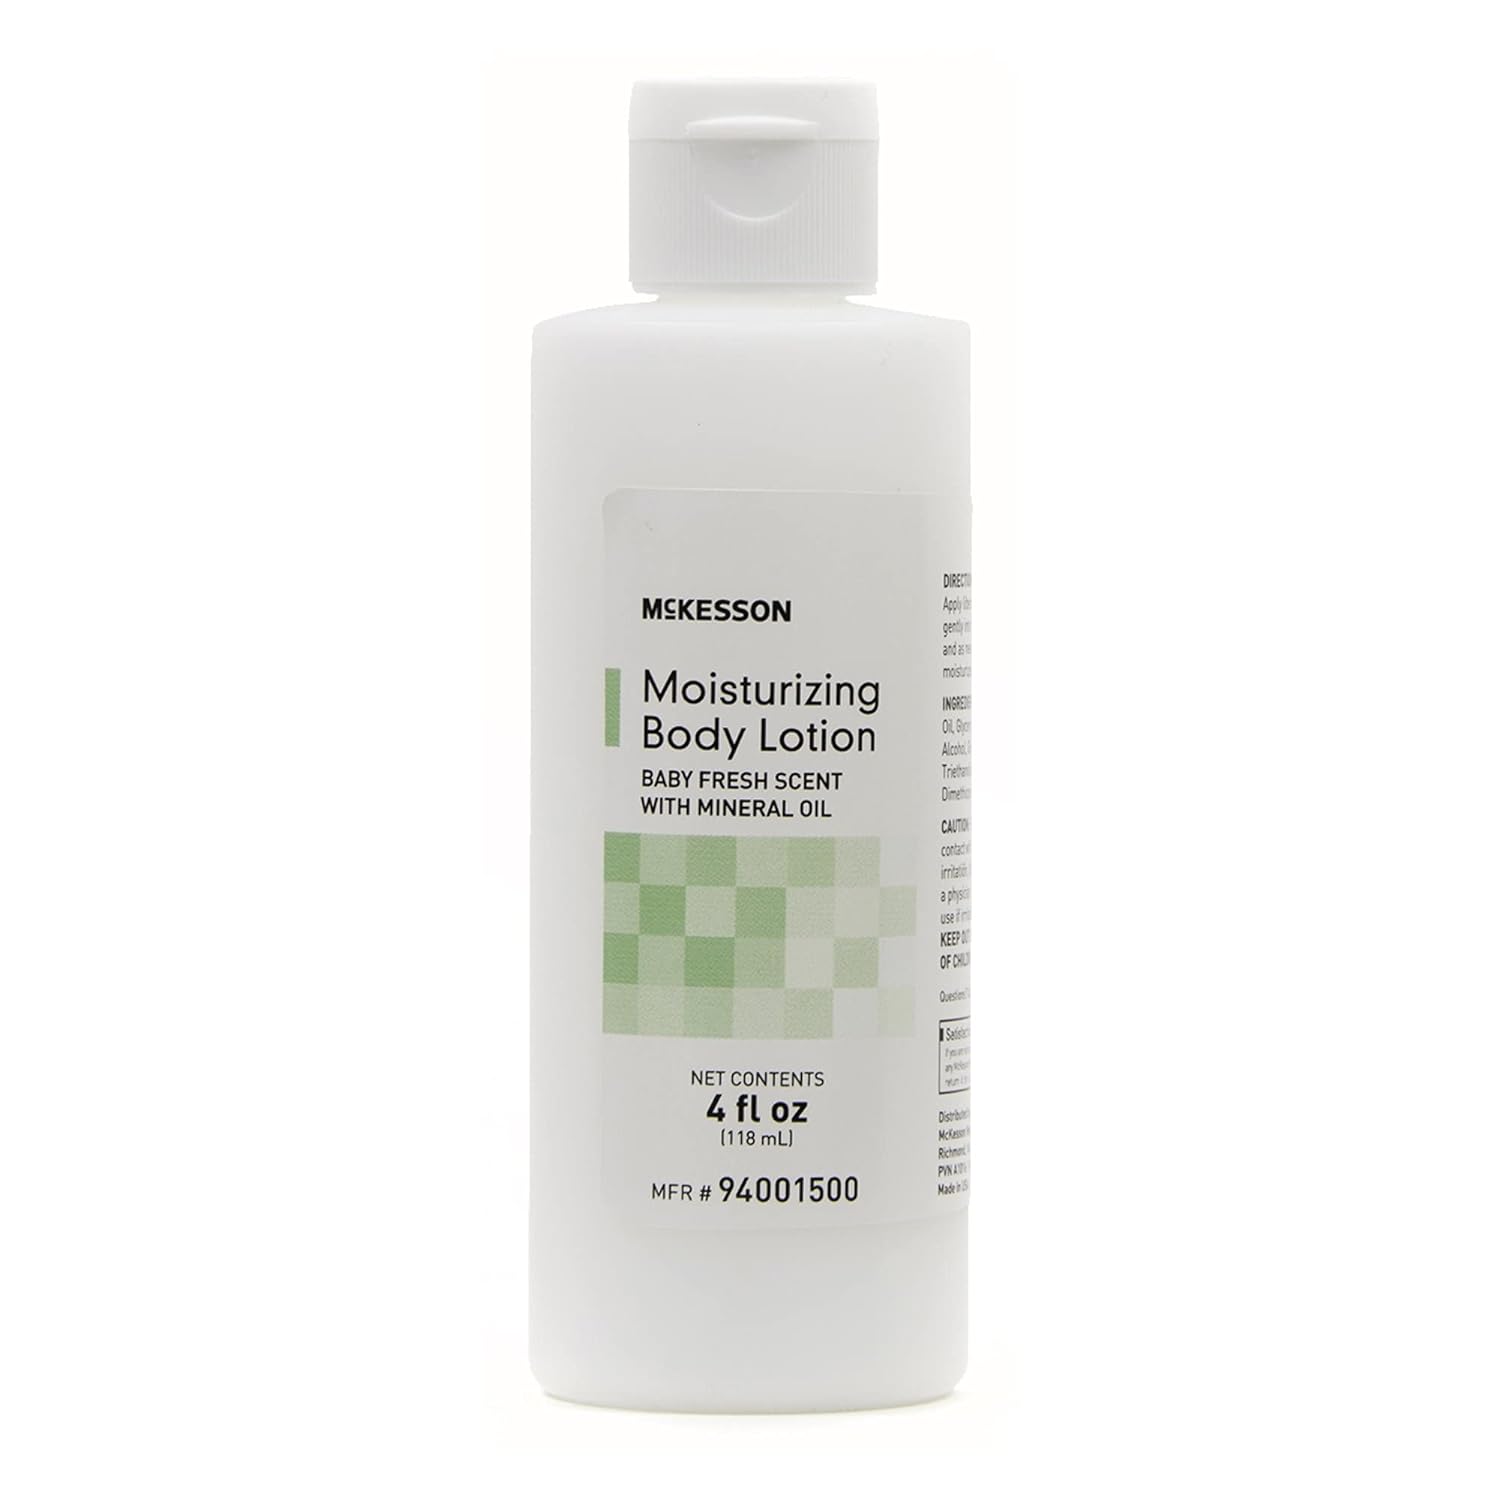 McKesson Moisturizing Body Lotion with Mineral Oil, Baby Fresh Scent, 4 fl oz, 12 Count : Baby